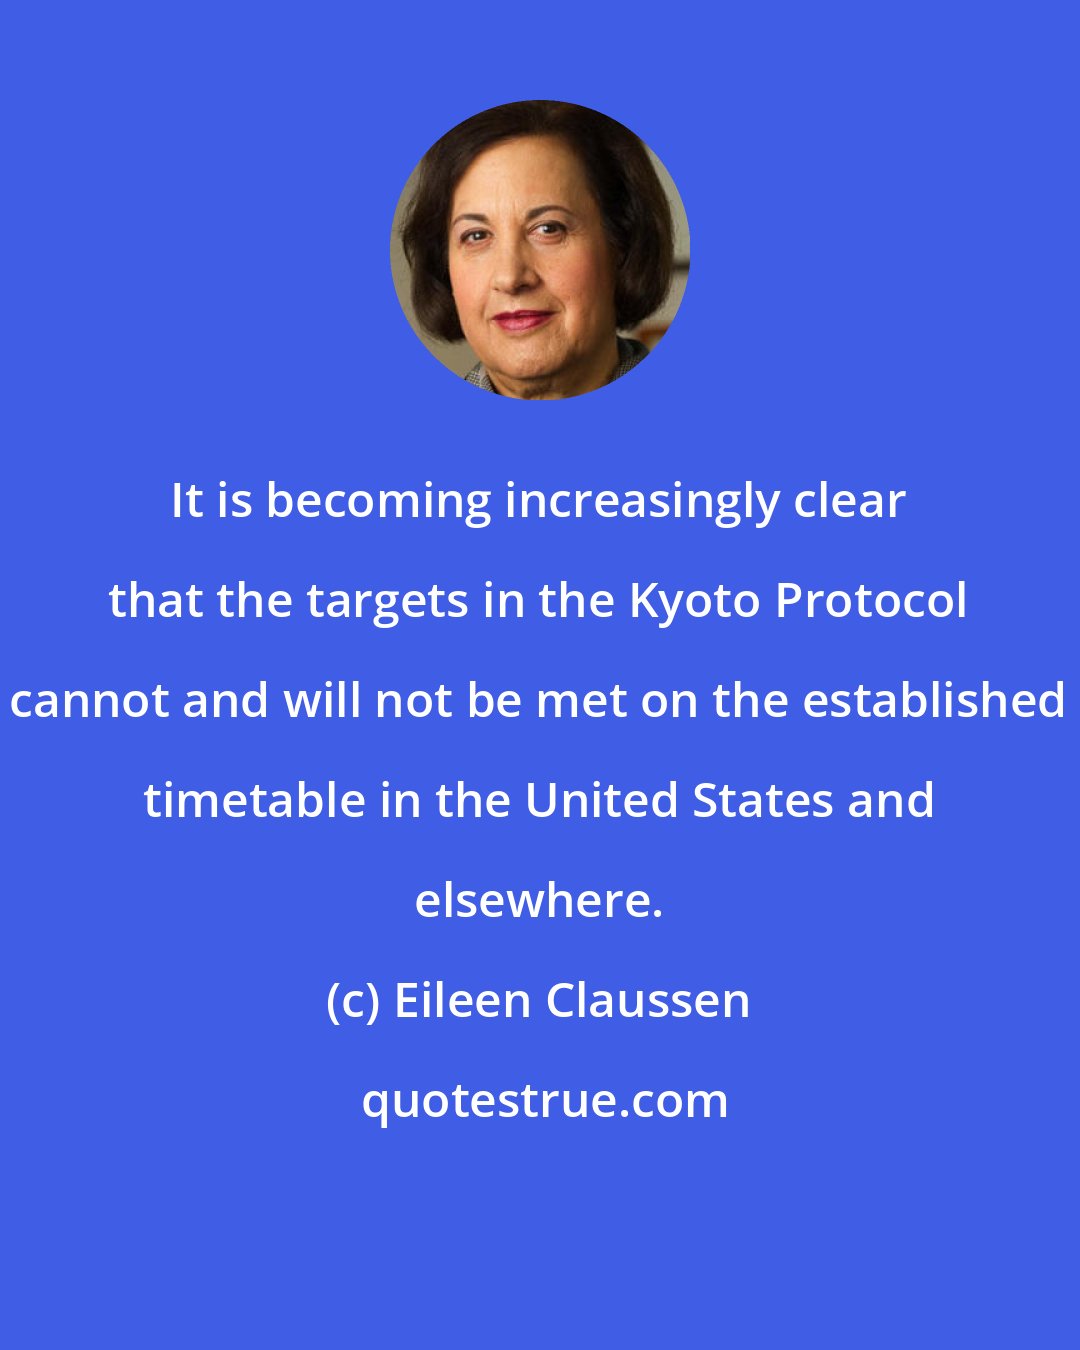 Eileen Claussen: It is becoming increasingly clear that the targets in the Kyoto Protocol cannot and will not be met on the established timetable in the United States and elsewhere.